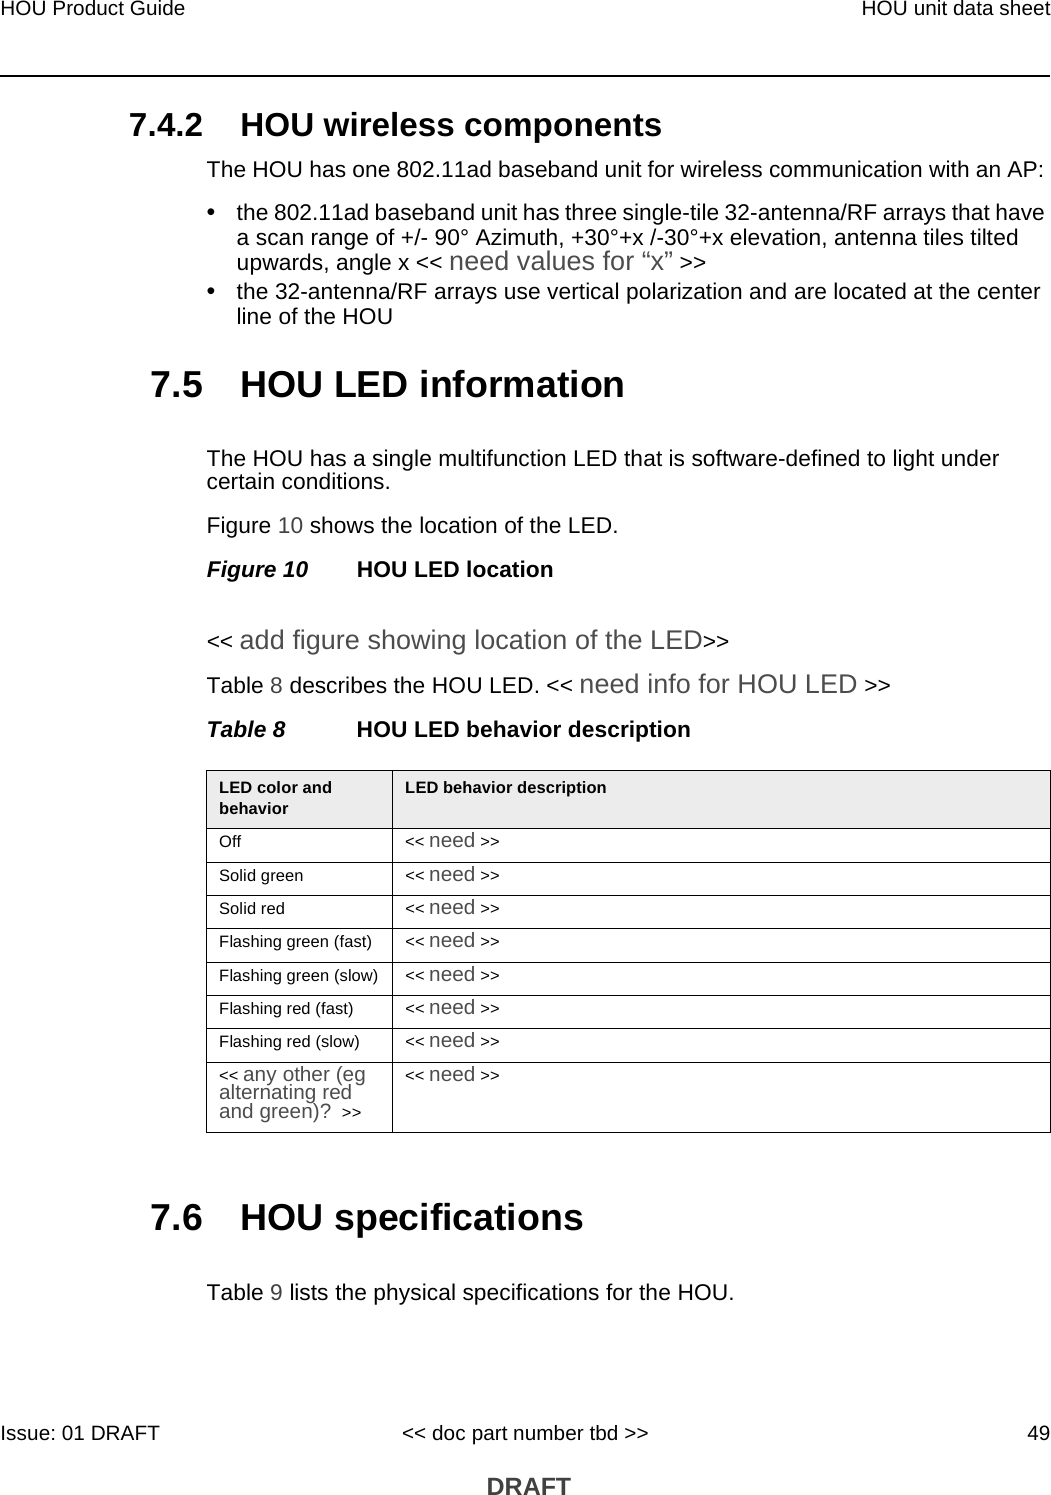 HOU Product Guide HOU unit data sheetIssue: 01 DRAFT &lt;&lt; doc part number tbd &gt;&gt; 49 DRAFT7.4.2 HOU wireless componentsThe HOU has one 802.11ad baseband unit for wireless communication with an AP: •the 802.11ad baseband unit has three single-tile 32-antenna/RF arrays that have a scan range of +/- 90° Azimuth, +30°+x /-30°+x elevation, antenna tiles tilted upwards, angle x &lt;&lt; need values for “x” &gt;&gt;•the 32-antenna/RF arrays use vertical polarization and are located at the center line of the HOU7.5 HOU LED informationThe HOU has a single multifunction LED that is software-defined to light under certain conditions. Figure 10 shows the location of the LED.Figure 10 HOU LED location&lt;&lt; add figure showing location of the LED&gt;&gt;Table 8 describes the HOU LED. &lt;&lt; need info for HOU LED &gt;&gt;Table 8 HOU LED behavior description7.6 HOU specificationsTable 9 lists the physical specifications for the HOU. LED color and behavior LED behavior descriptionOff &lt;&lt; need &gt;&gt;Solid green &lt;&lt; need &gt;&gt;Solid red &lt;&lt; need &gt;&gt;Flashing green (fast) &lt;&lt; need &gt;&gt;Flashing green (slow) &lt;&lt; need &gt;&gt;Flashing red (fast) &lt;&lt; need &gt;&gt;Flashing red (slow) &lt;&lt; need &gt;&gt;&lt;&lt; any other (eg alternating red and green)?  &gt;&gt;&lt;&lt; need &gt;&gt;